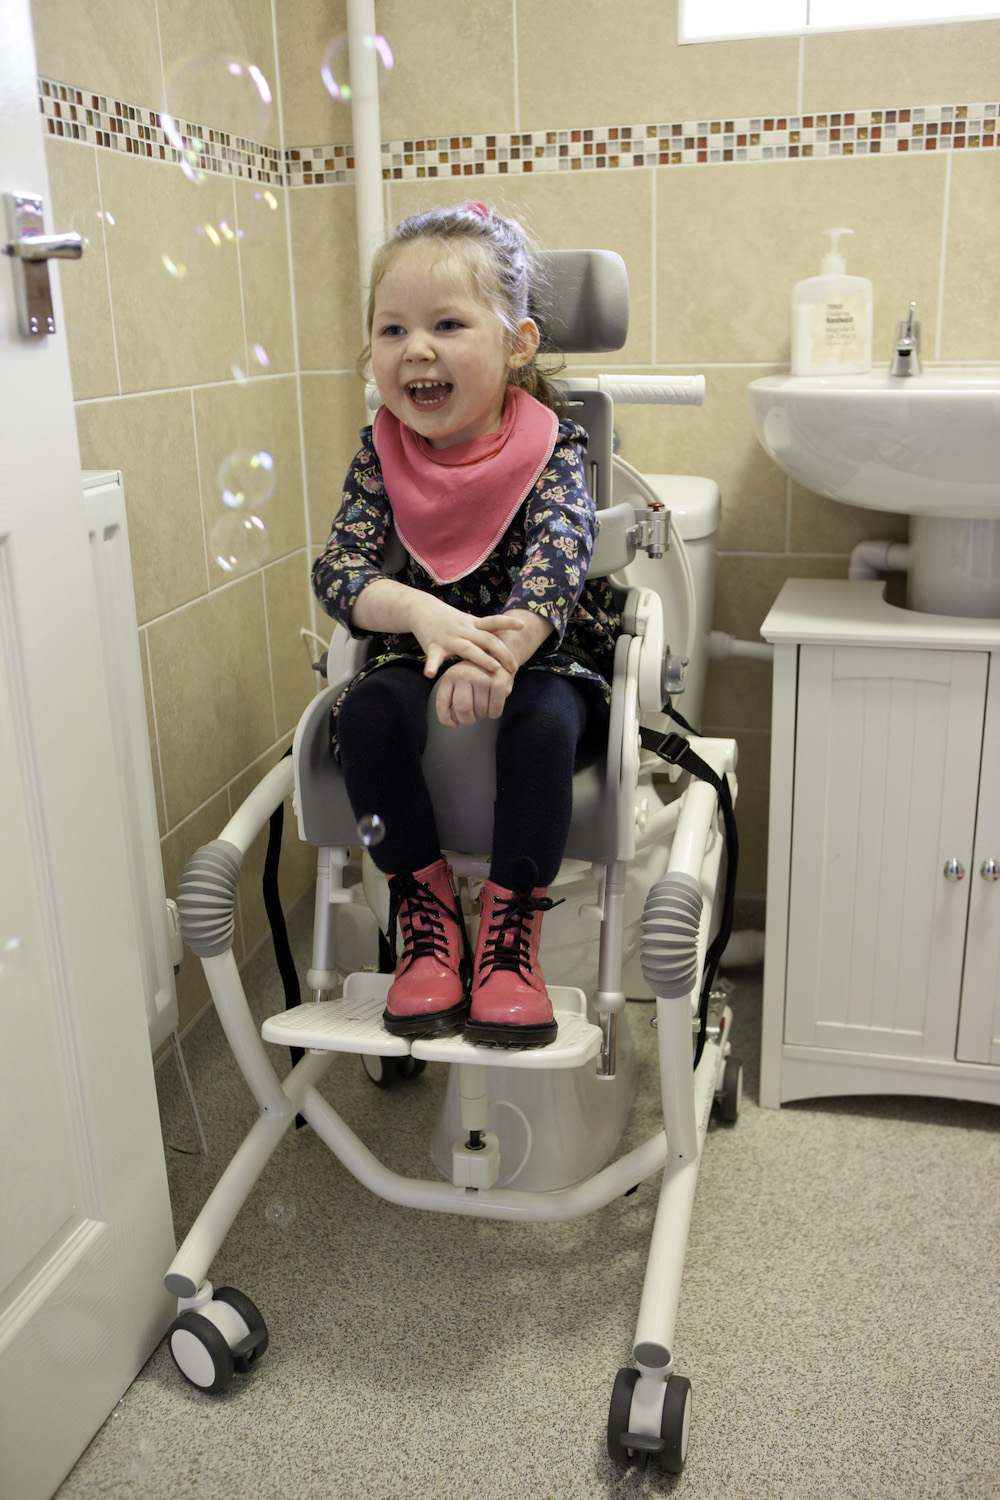 Adjustable Flamingo High Low Chair offers bathing and toileting independence for Tia and her family